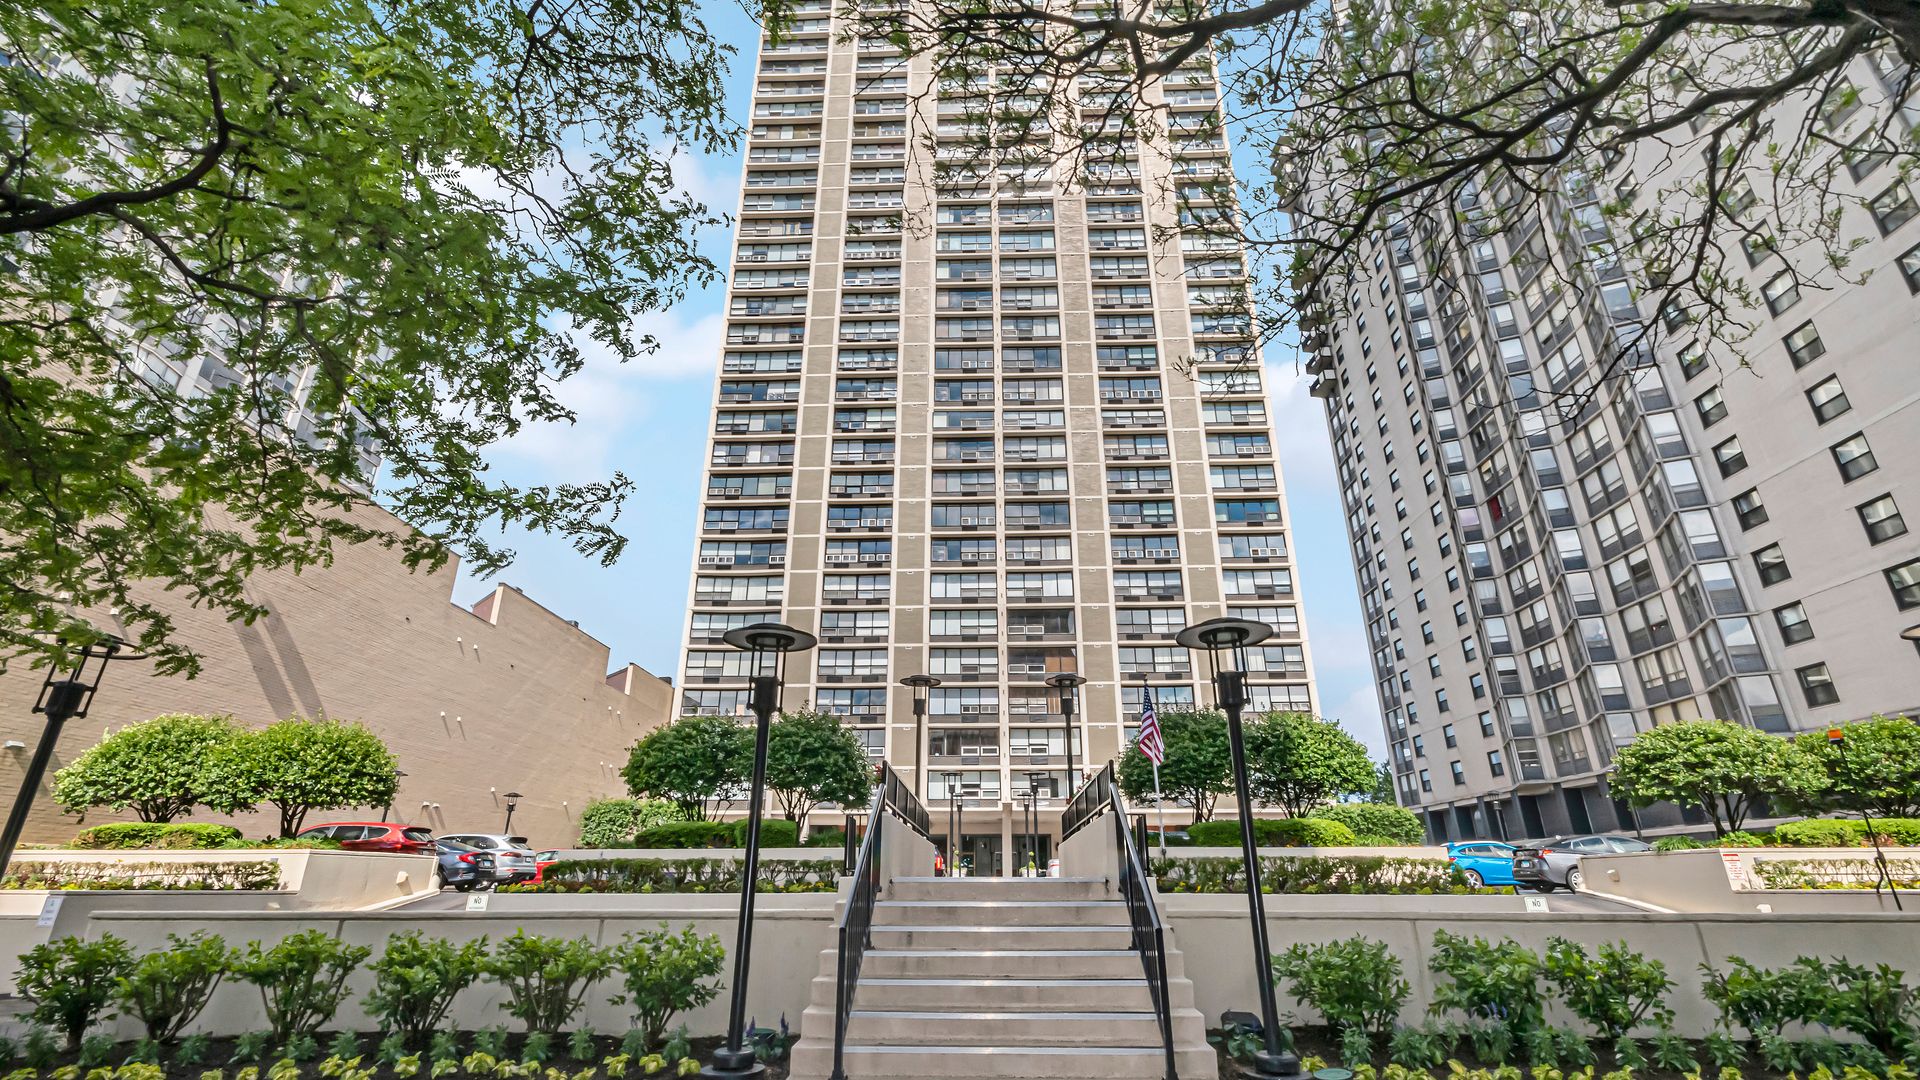 Main Photo: 5733 N SHERIDAN Road Unit 4C in Chicago: CHI - Edgewater Residential for sale ()  : MLS®# 11420667